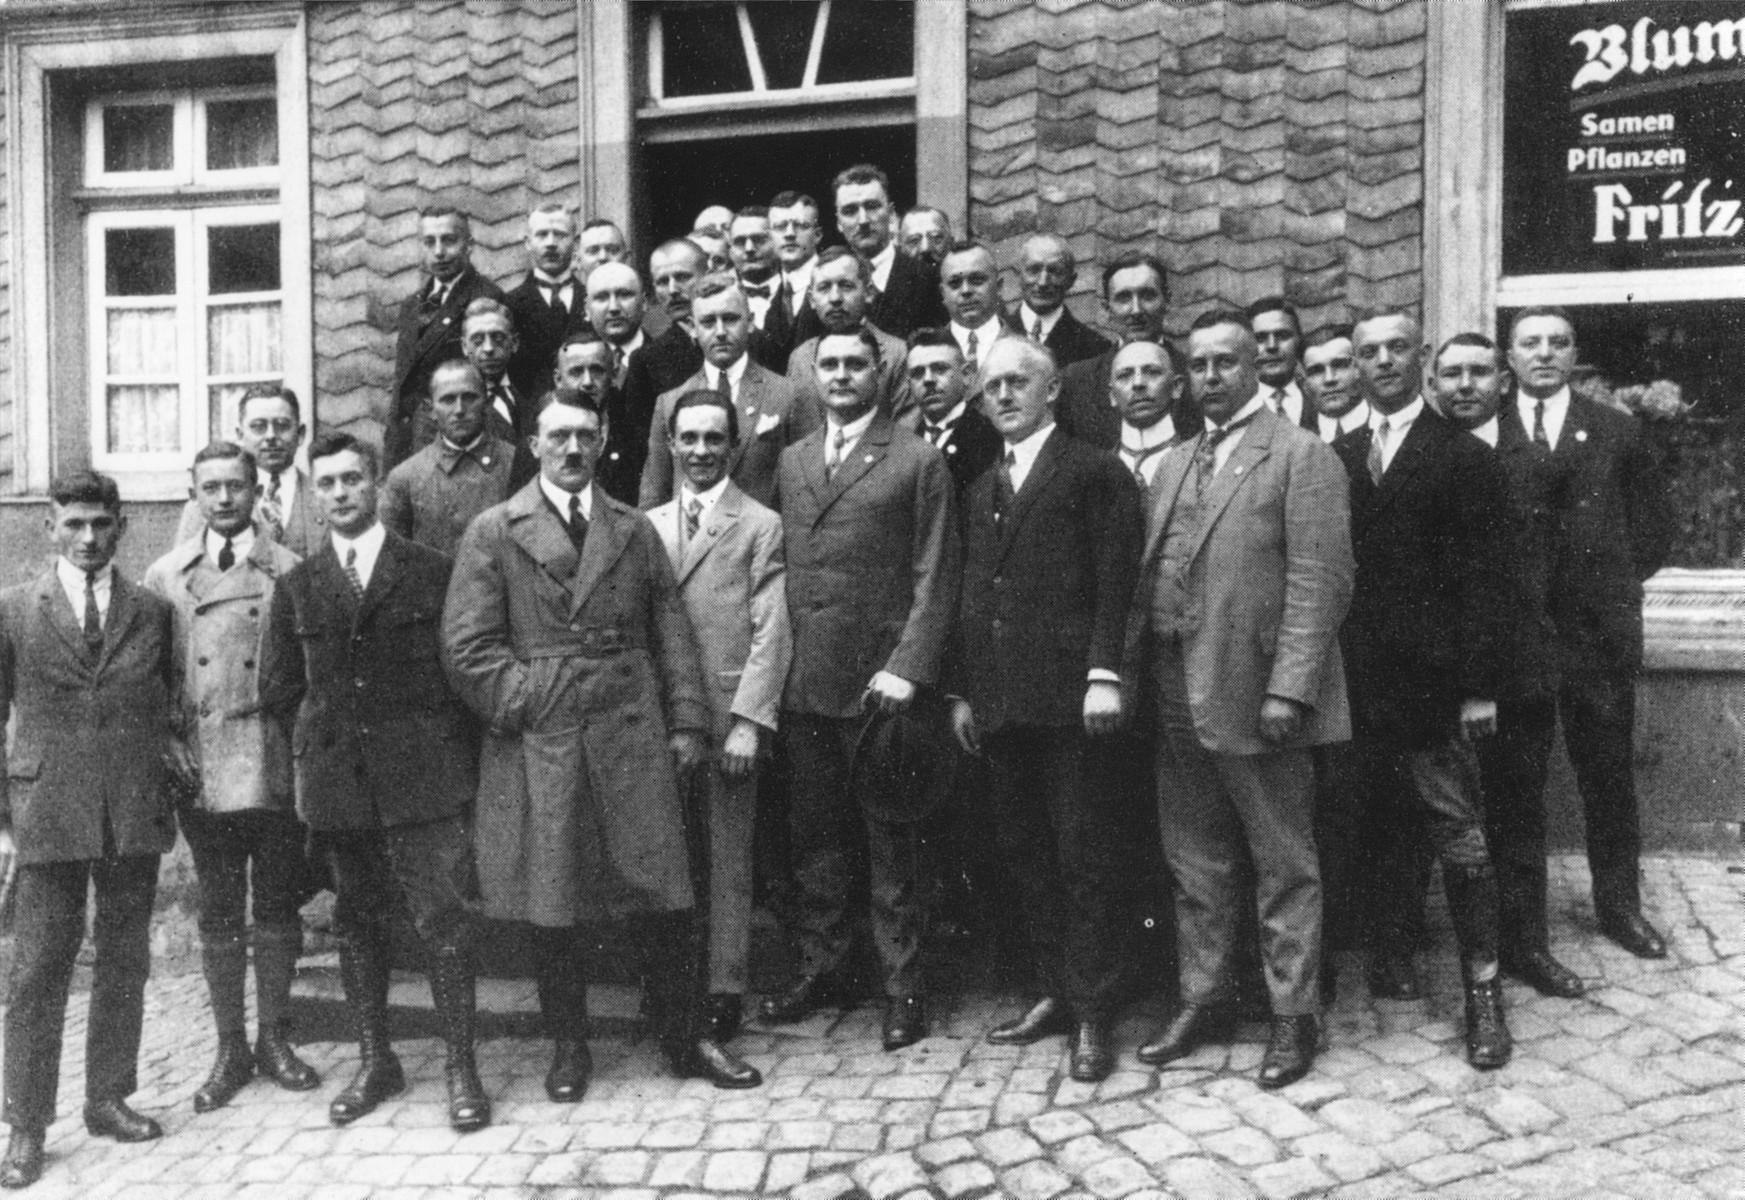 Adolf Hitler and Joseph Goebbels pose with party members in Hattingen